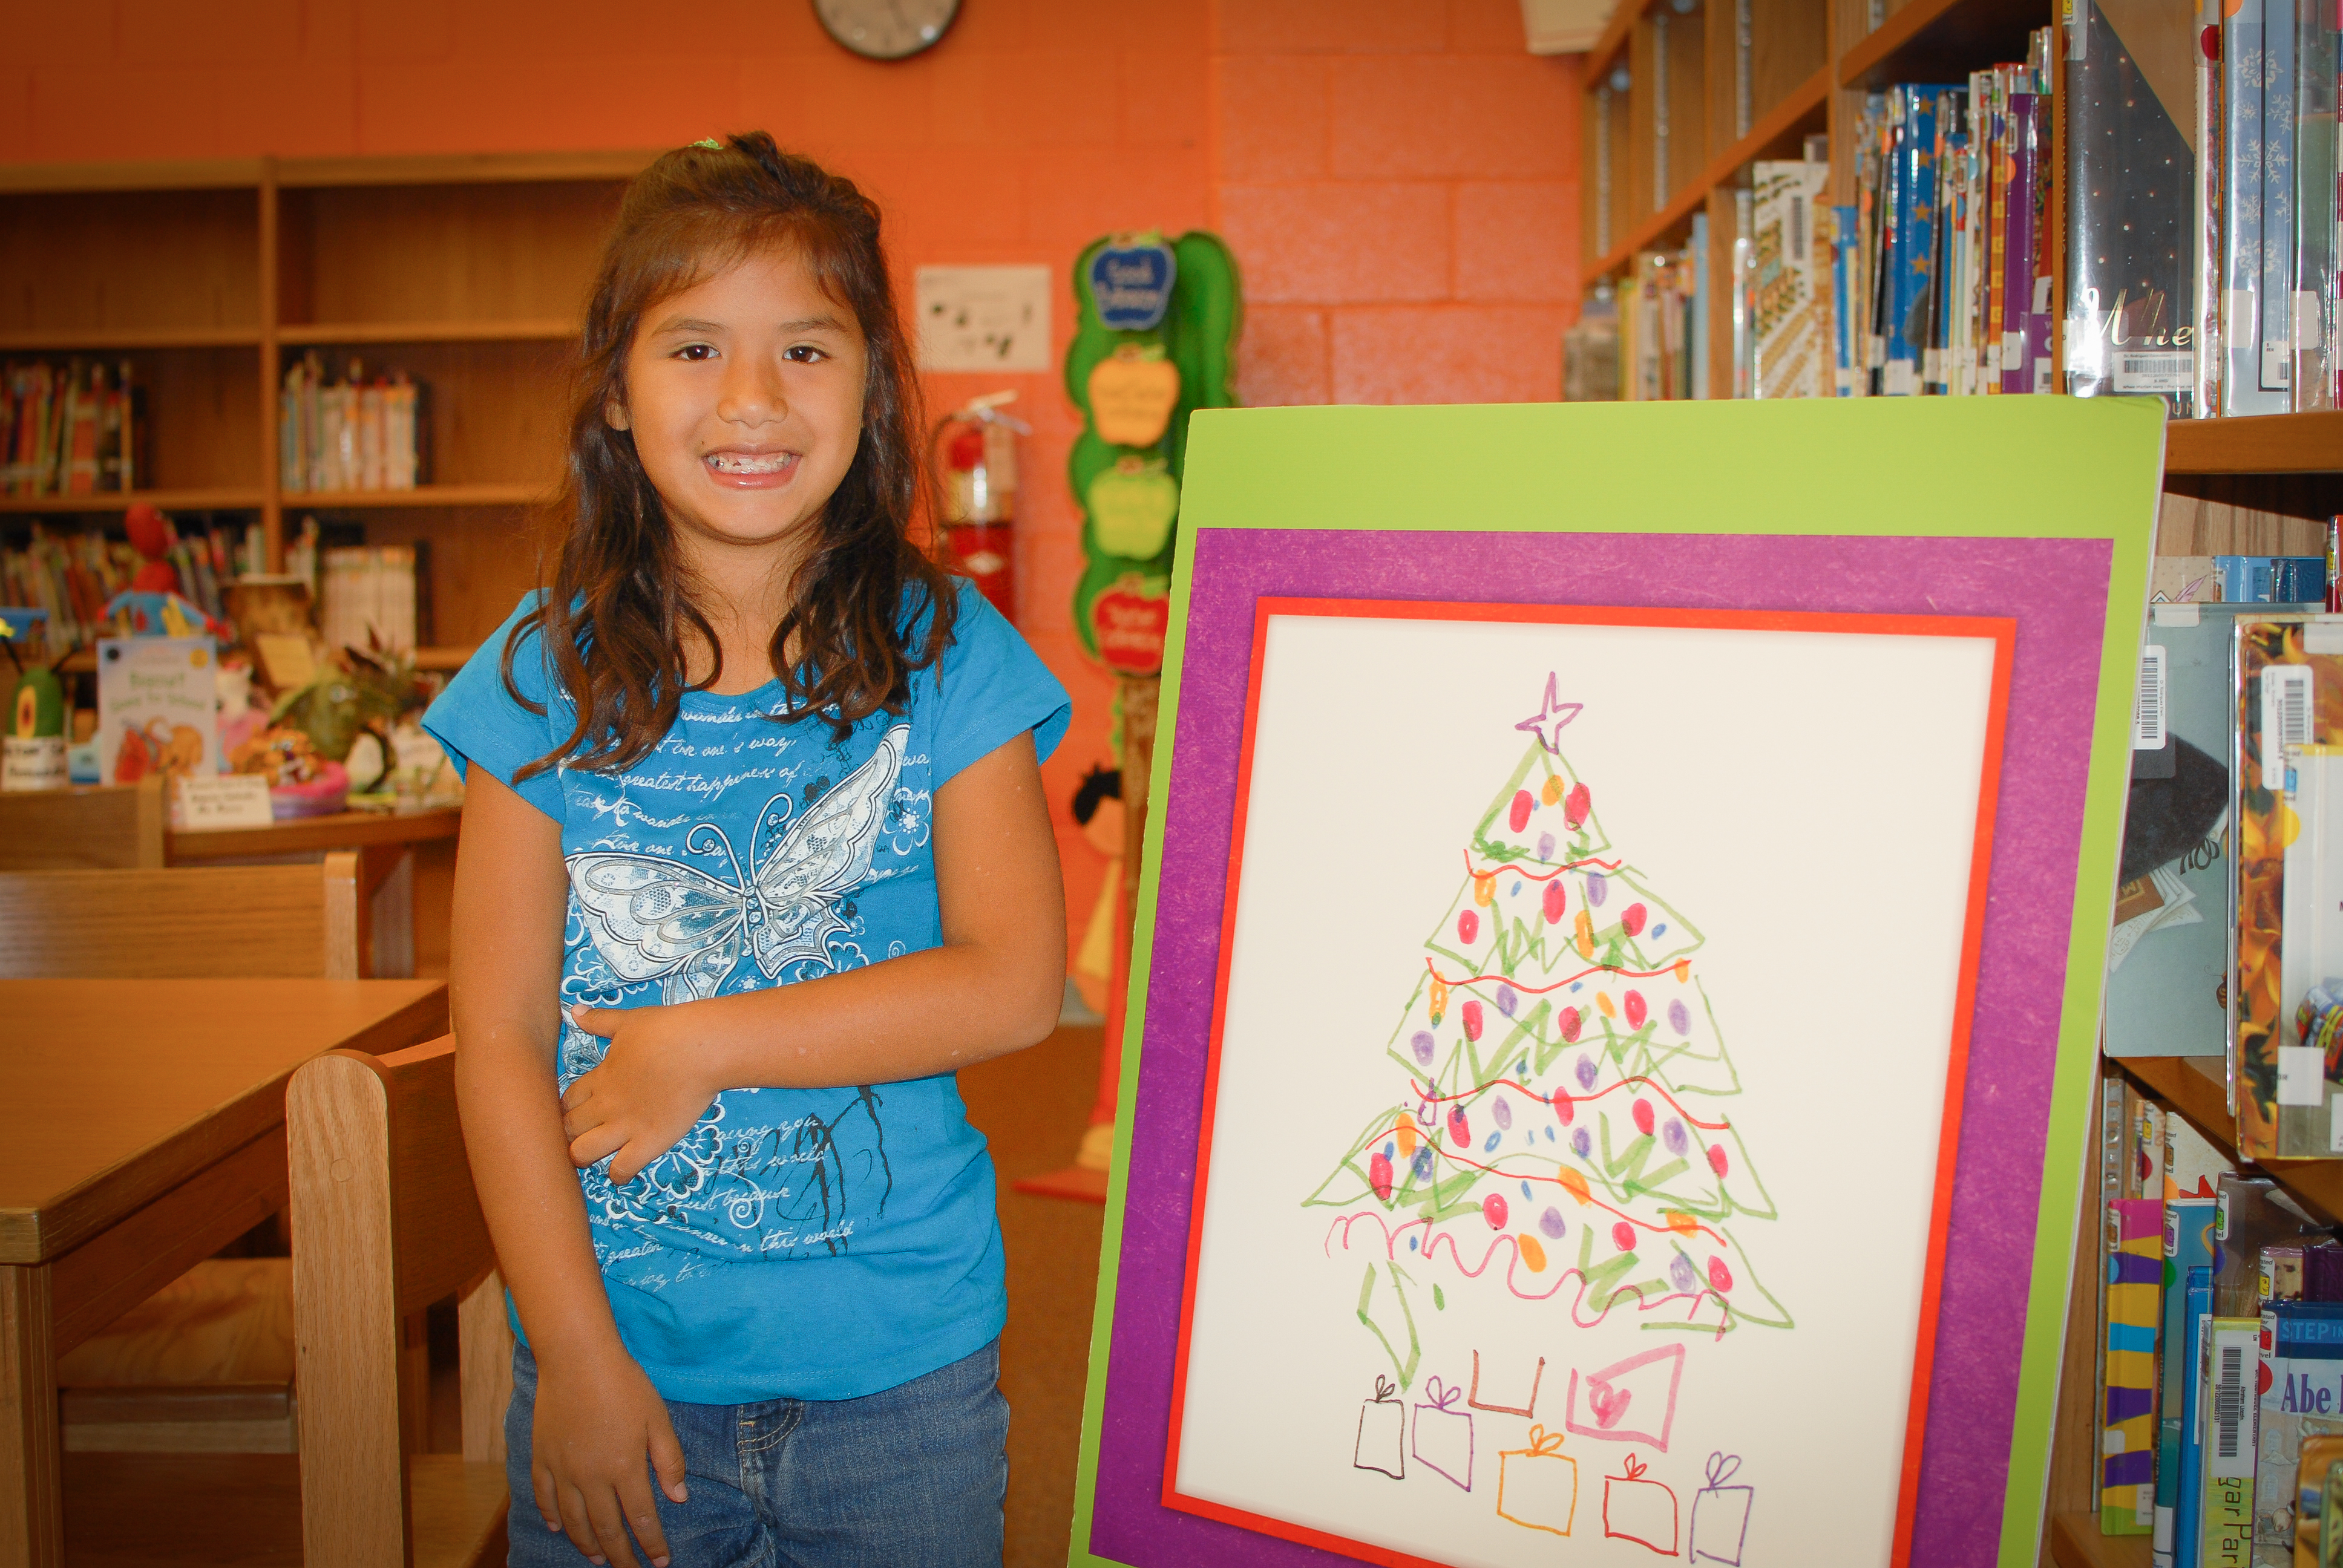 Rodriguez Elementary student selected to have artwork published